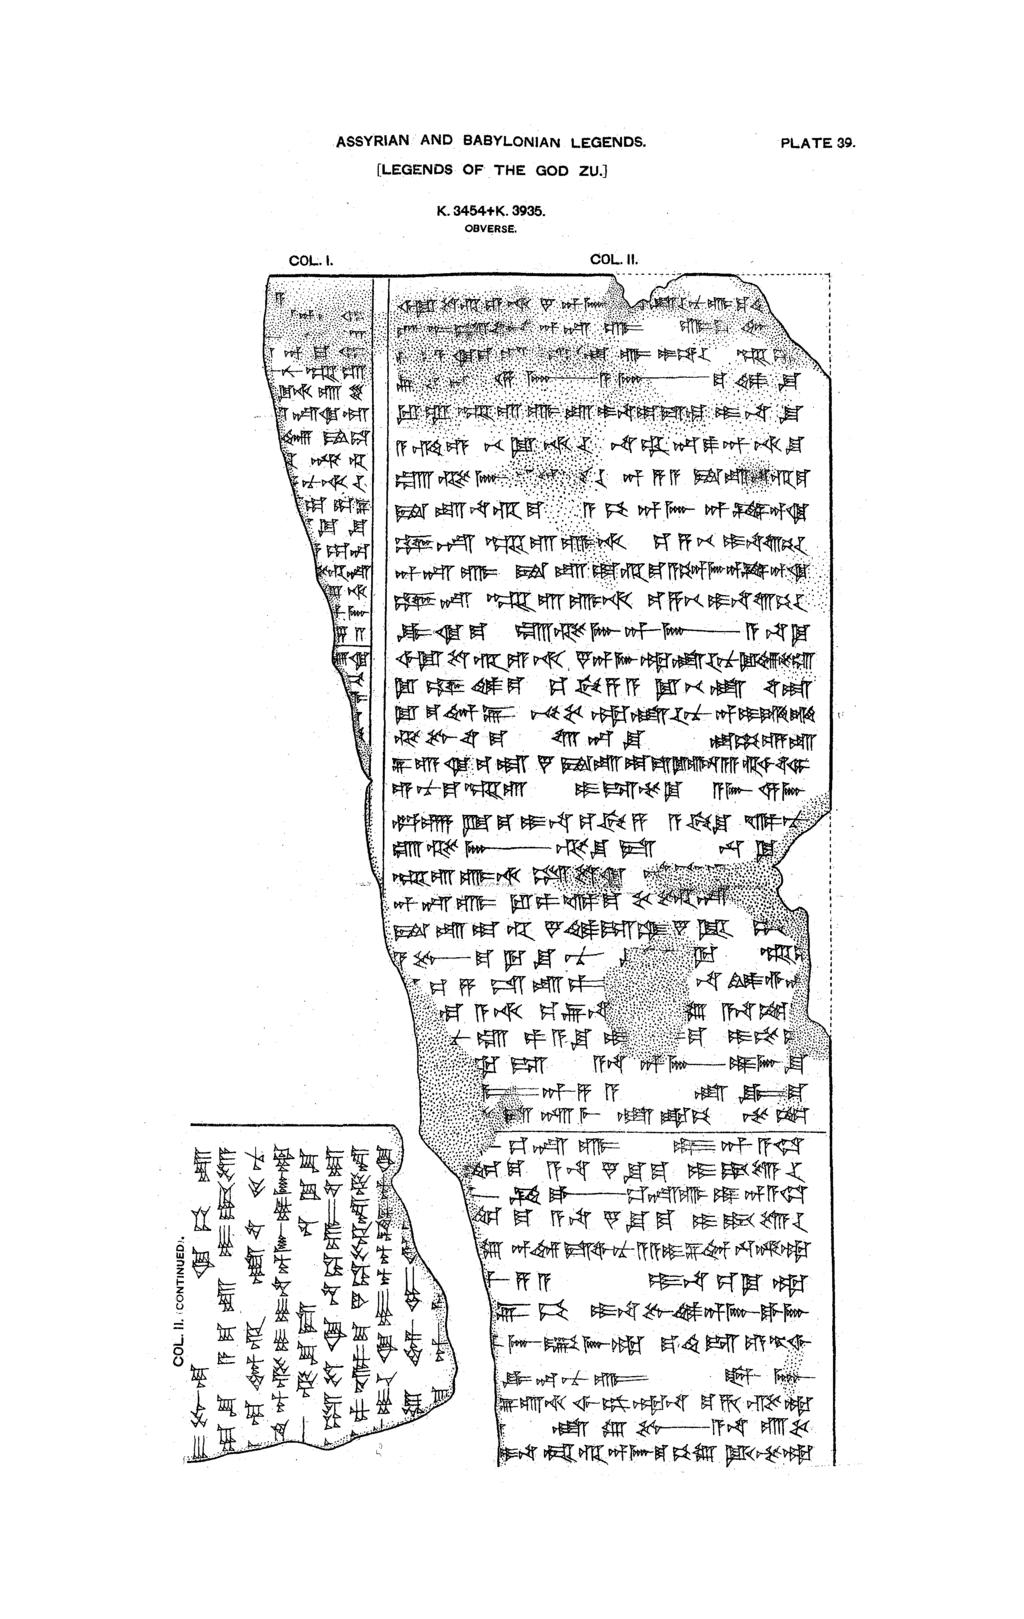 ASSYRlAN AND BABYLONIAN LEGENDS. PLATE 39.